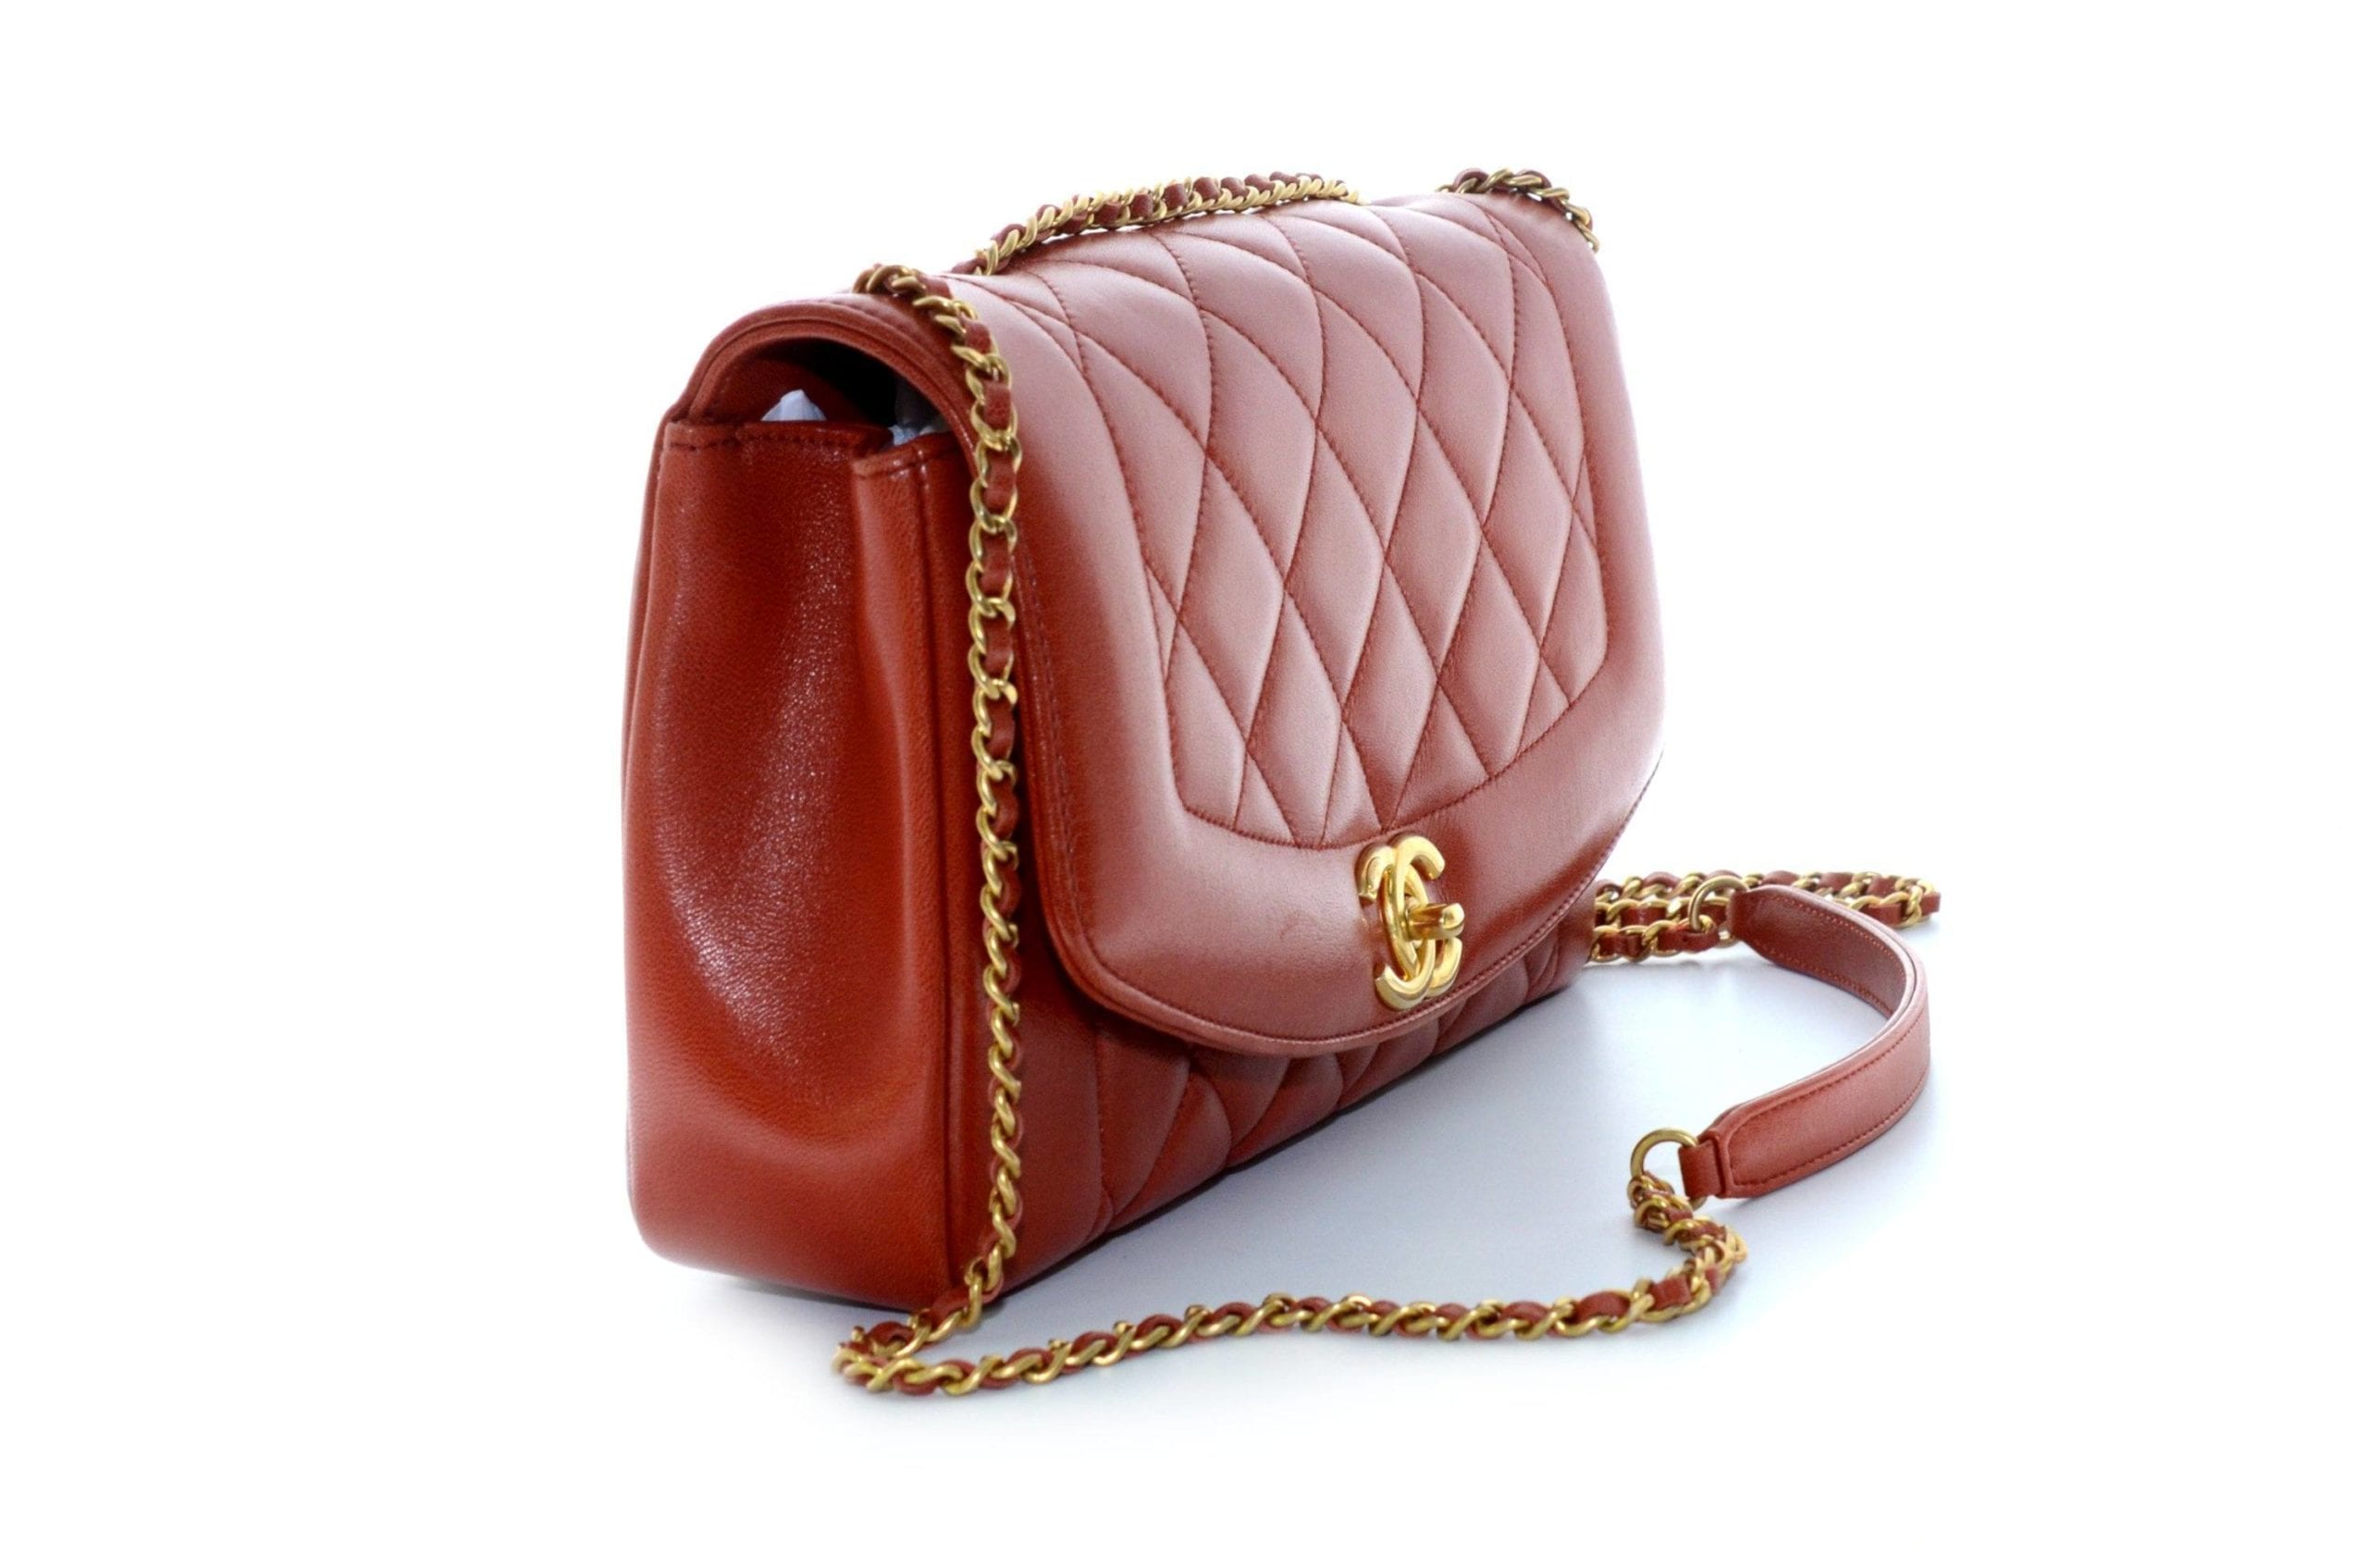 Chanel Diana Bag in Red With Gold Hardware Medium Size.